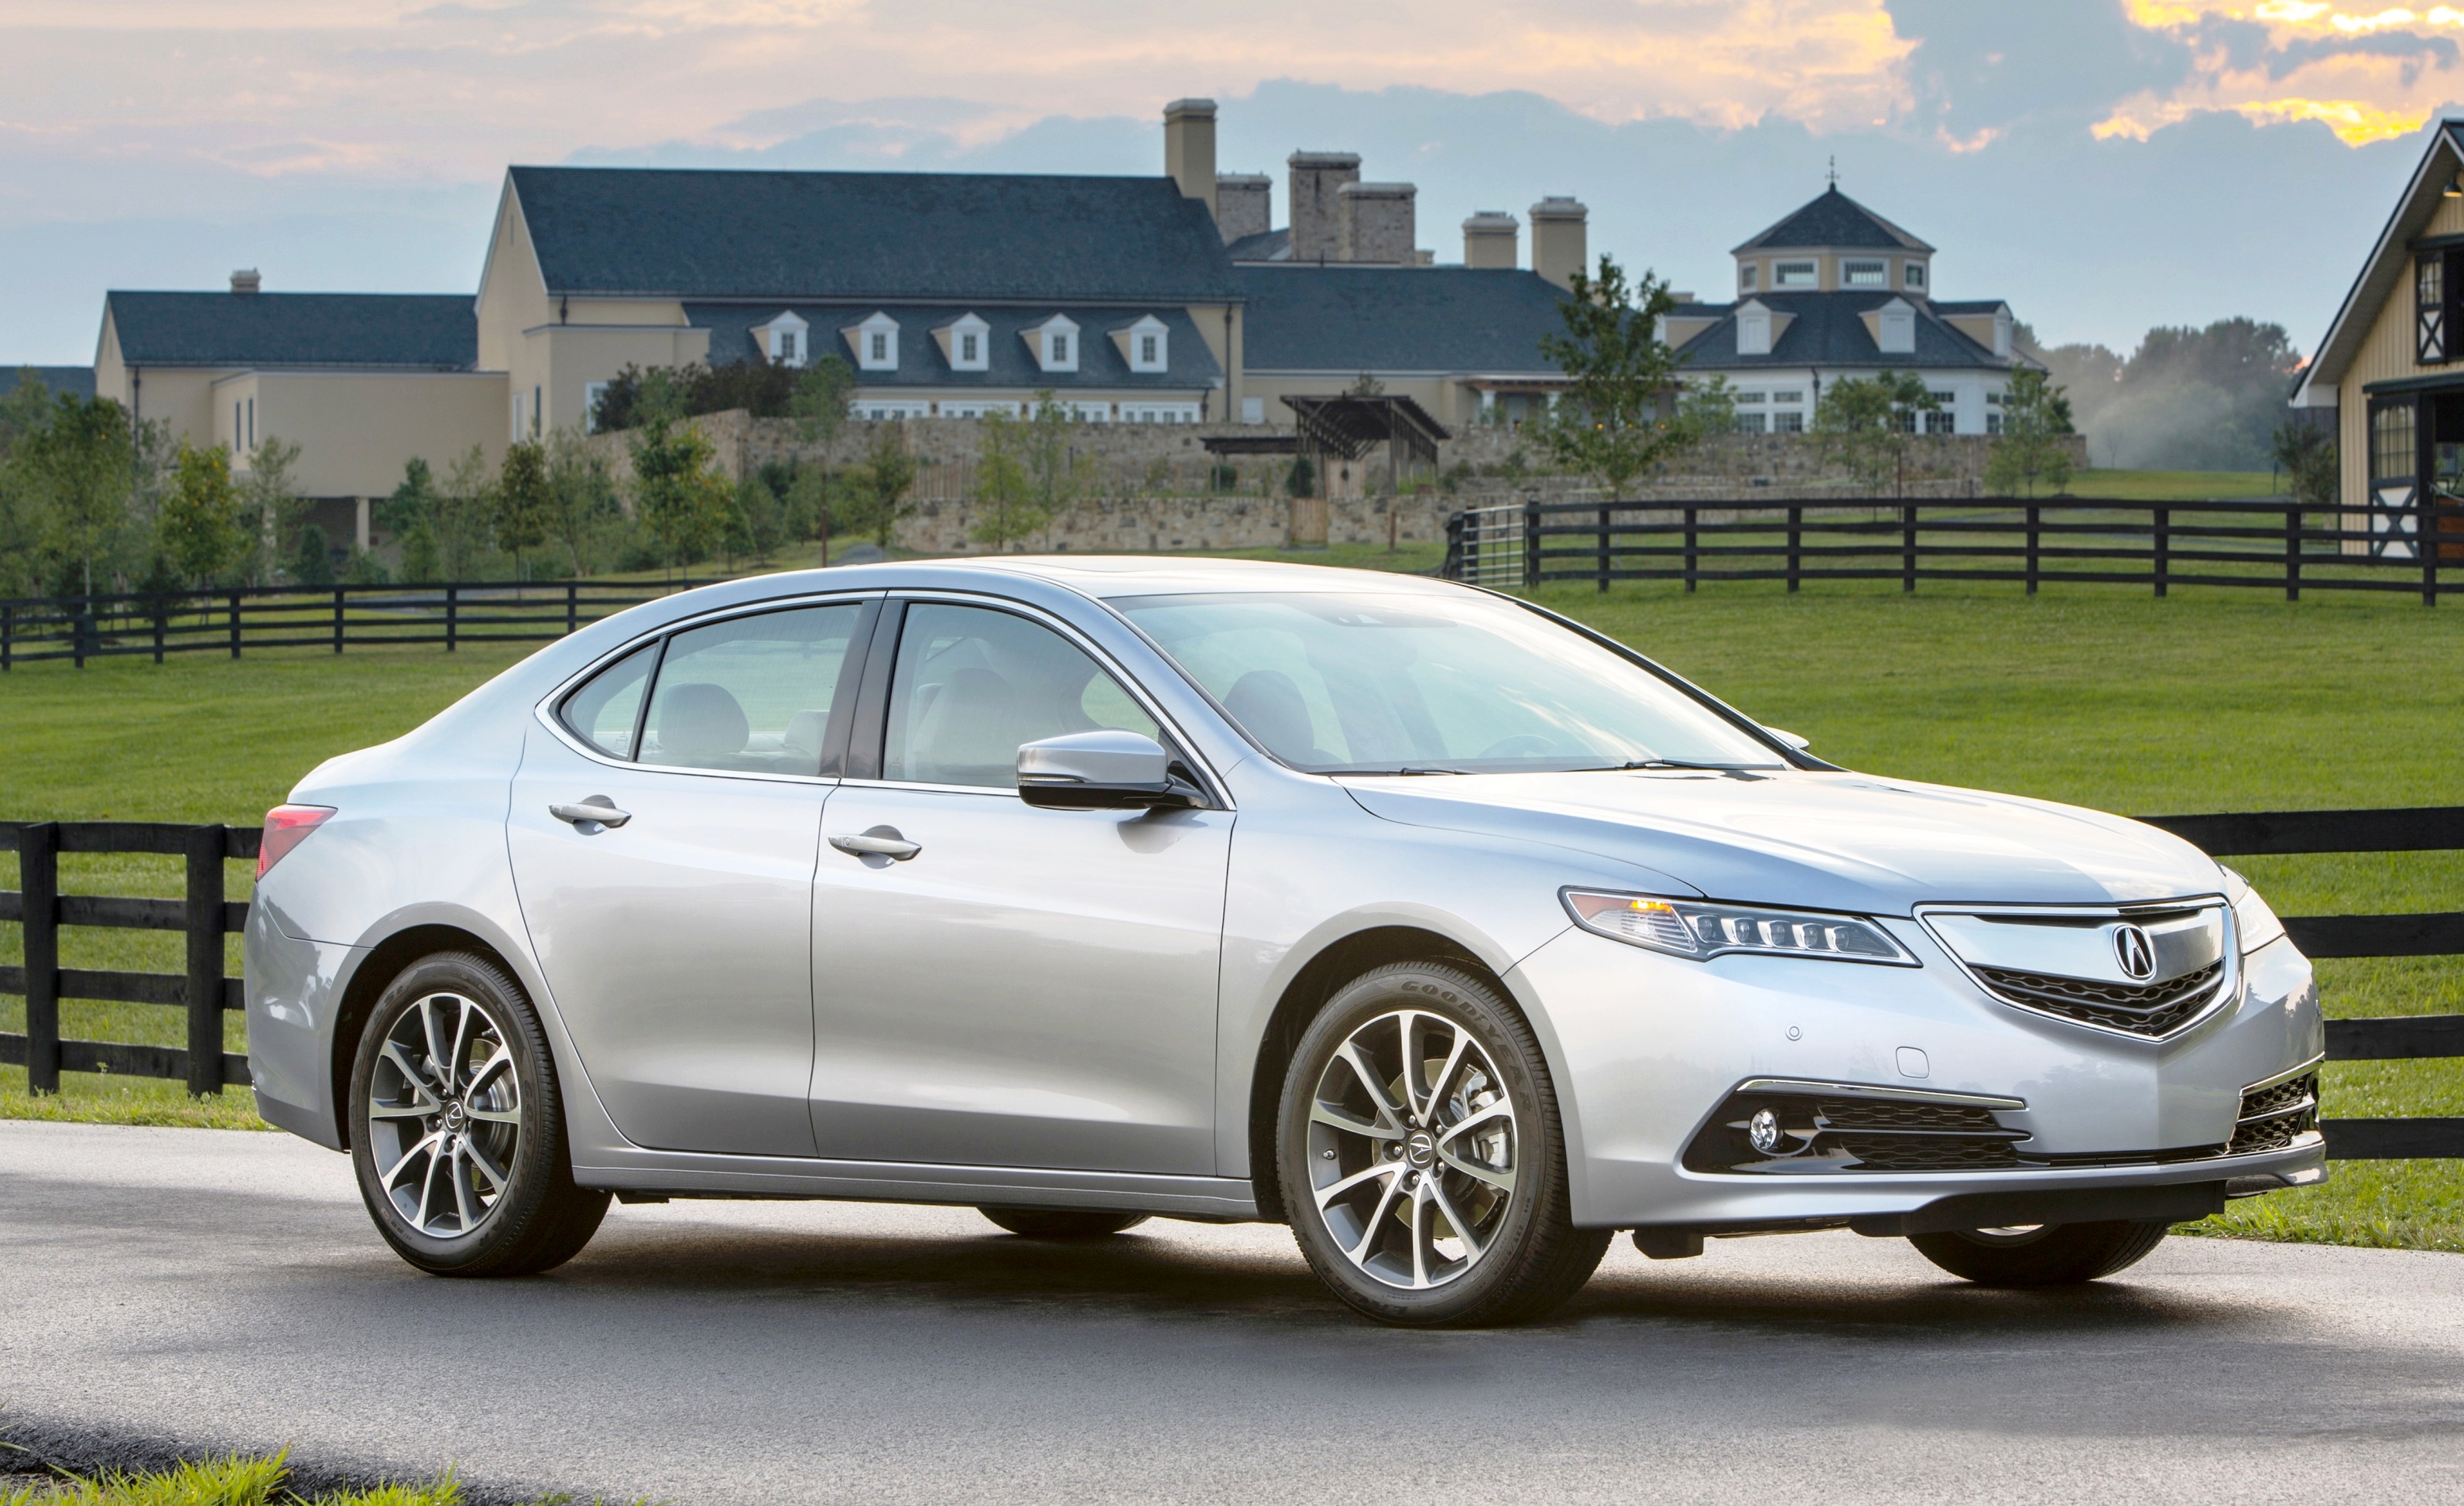 2015 Acura TLX Media Launch Brings 100 New Photos, Pricing, Colors and